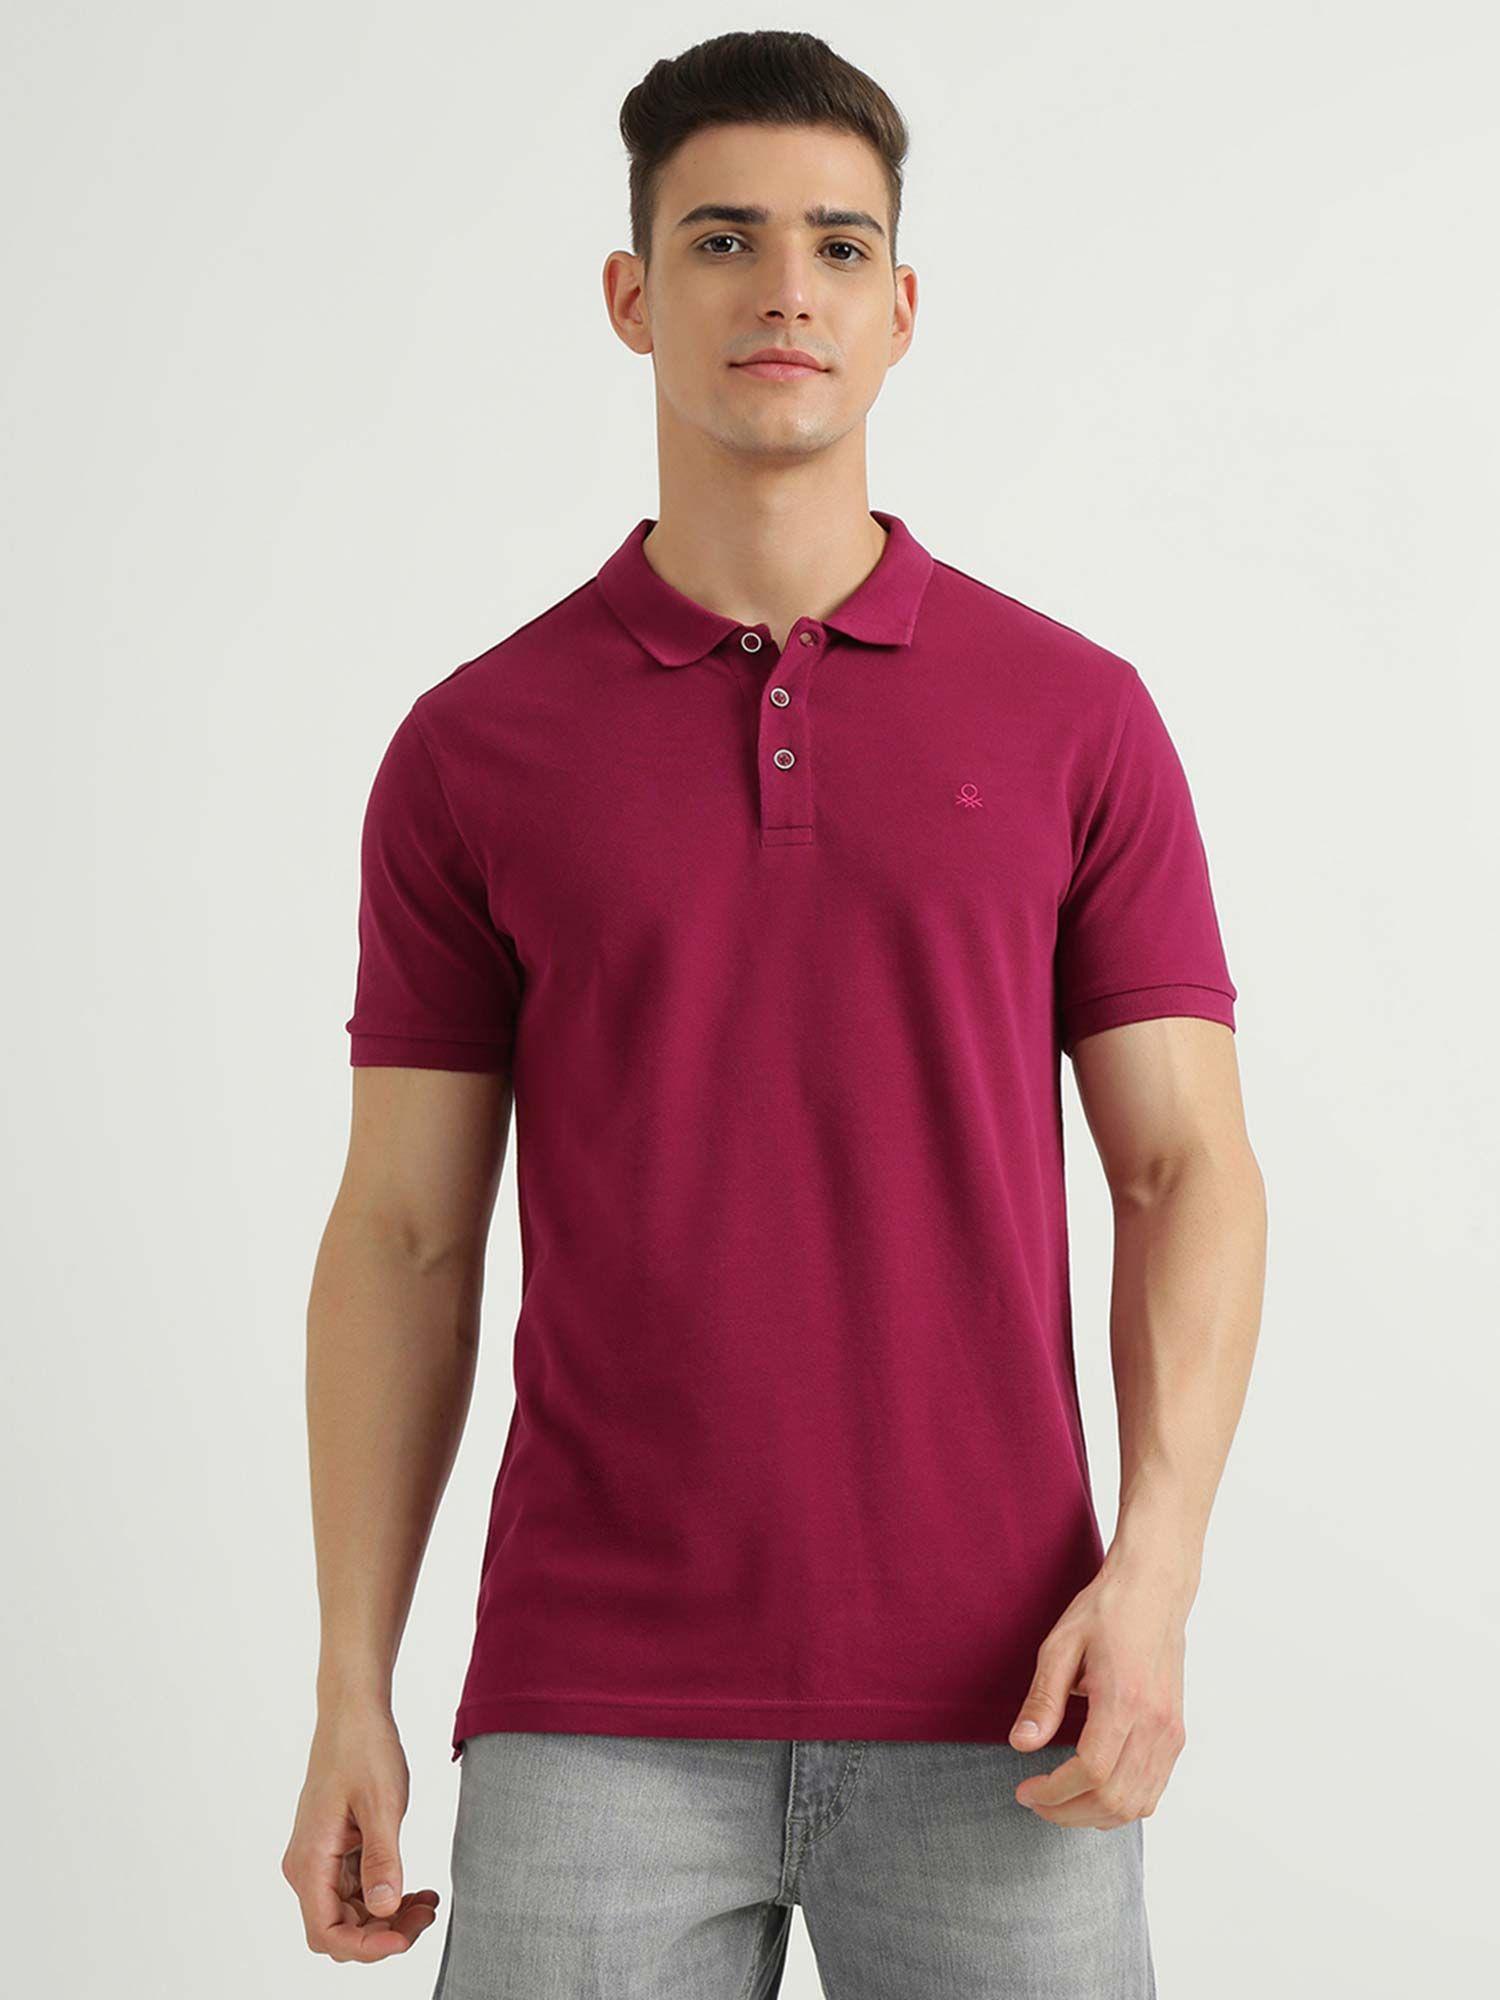 mens-short-sleeve-solid-polo-t-shirt